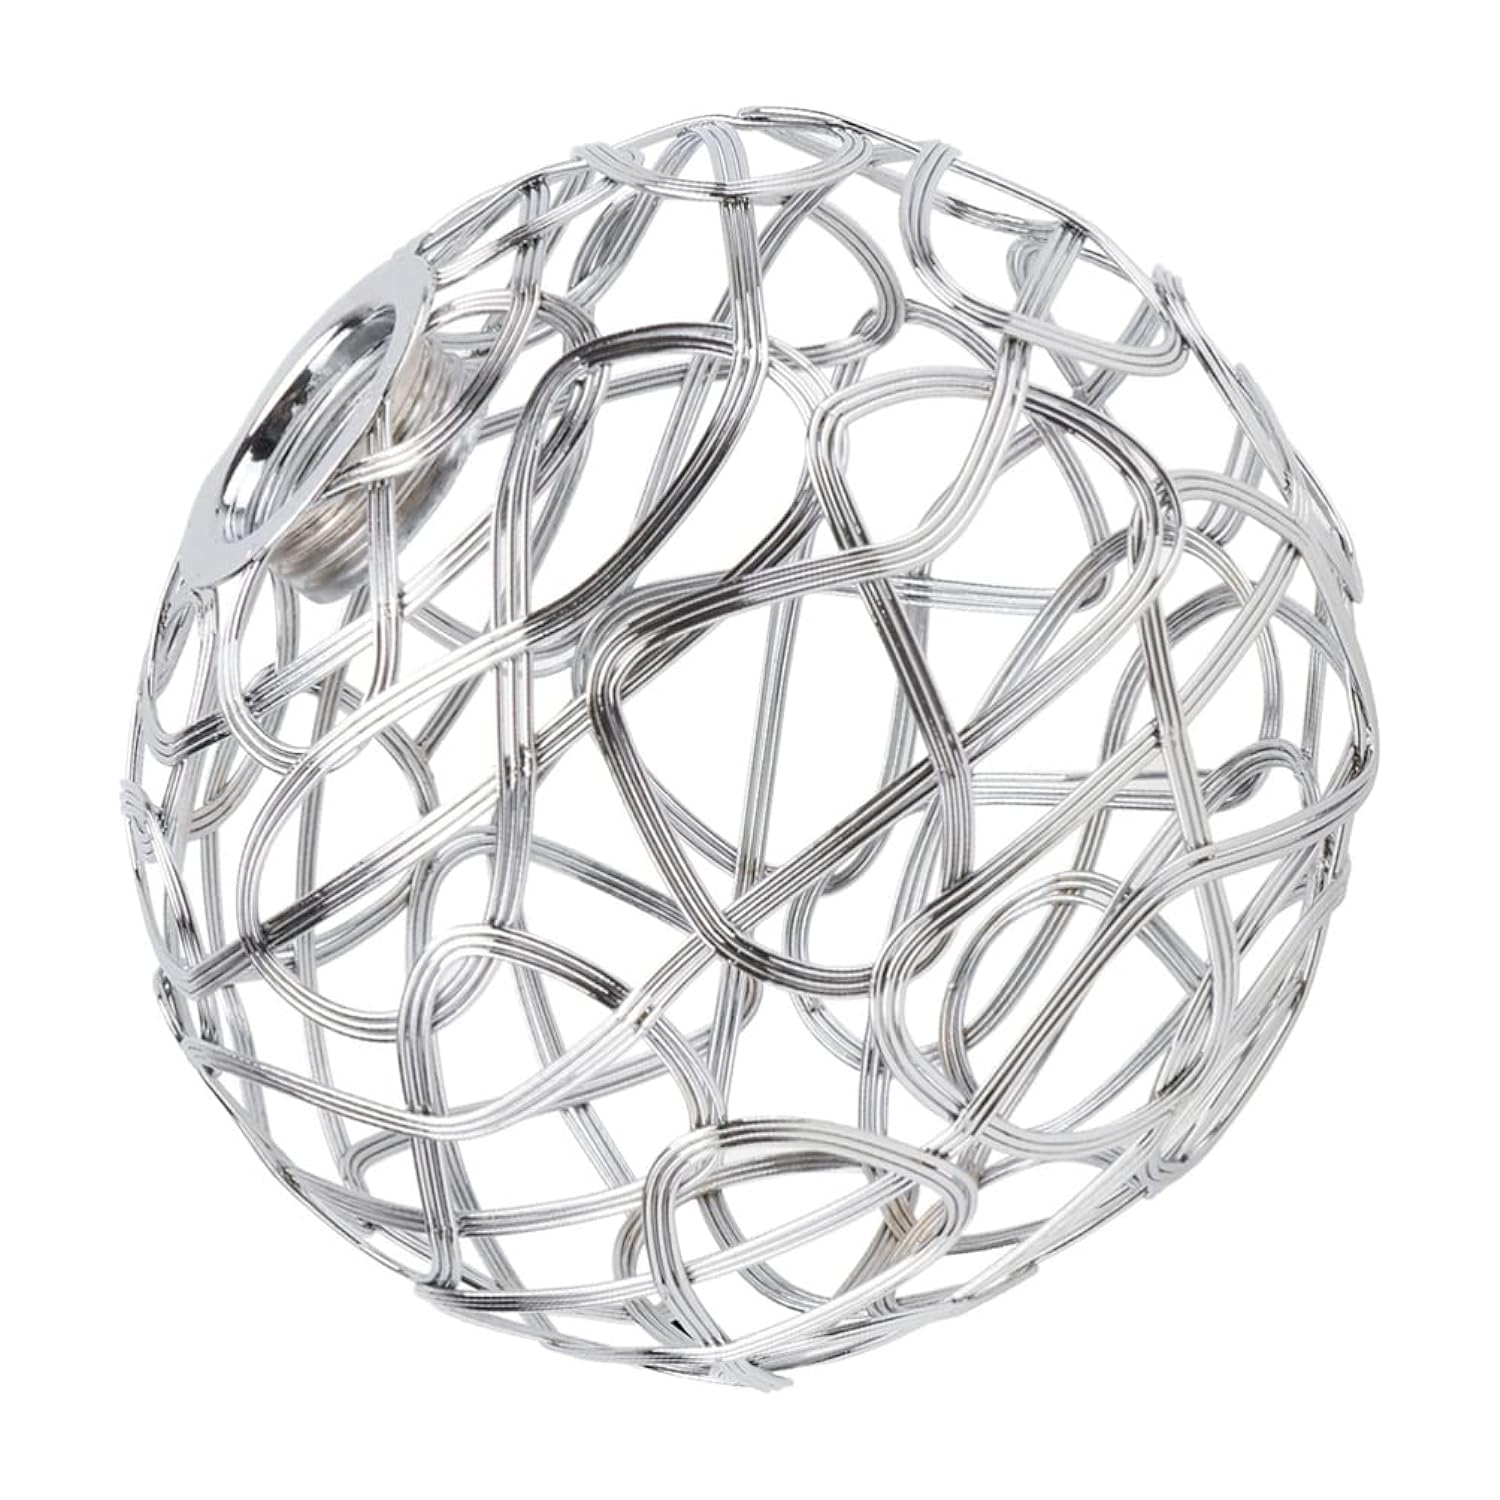 thinkstar Metal Cage Lamp Shade Rattan Lamp Shade Decorative Globe Lamp Shade Clip On Chandelier Light Covers Ceiling Pendant Ligh…